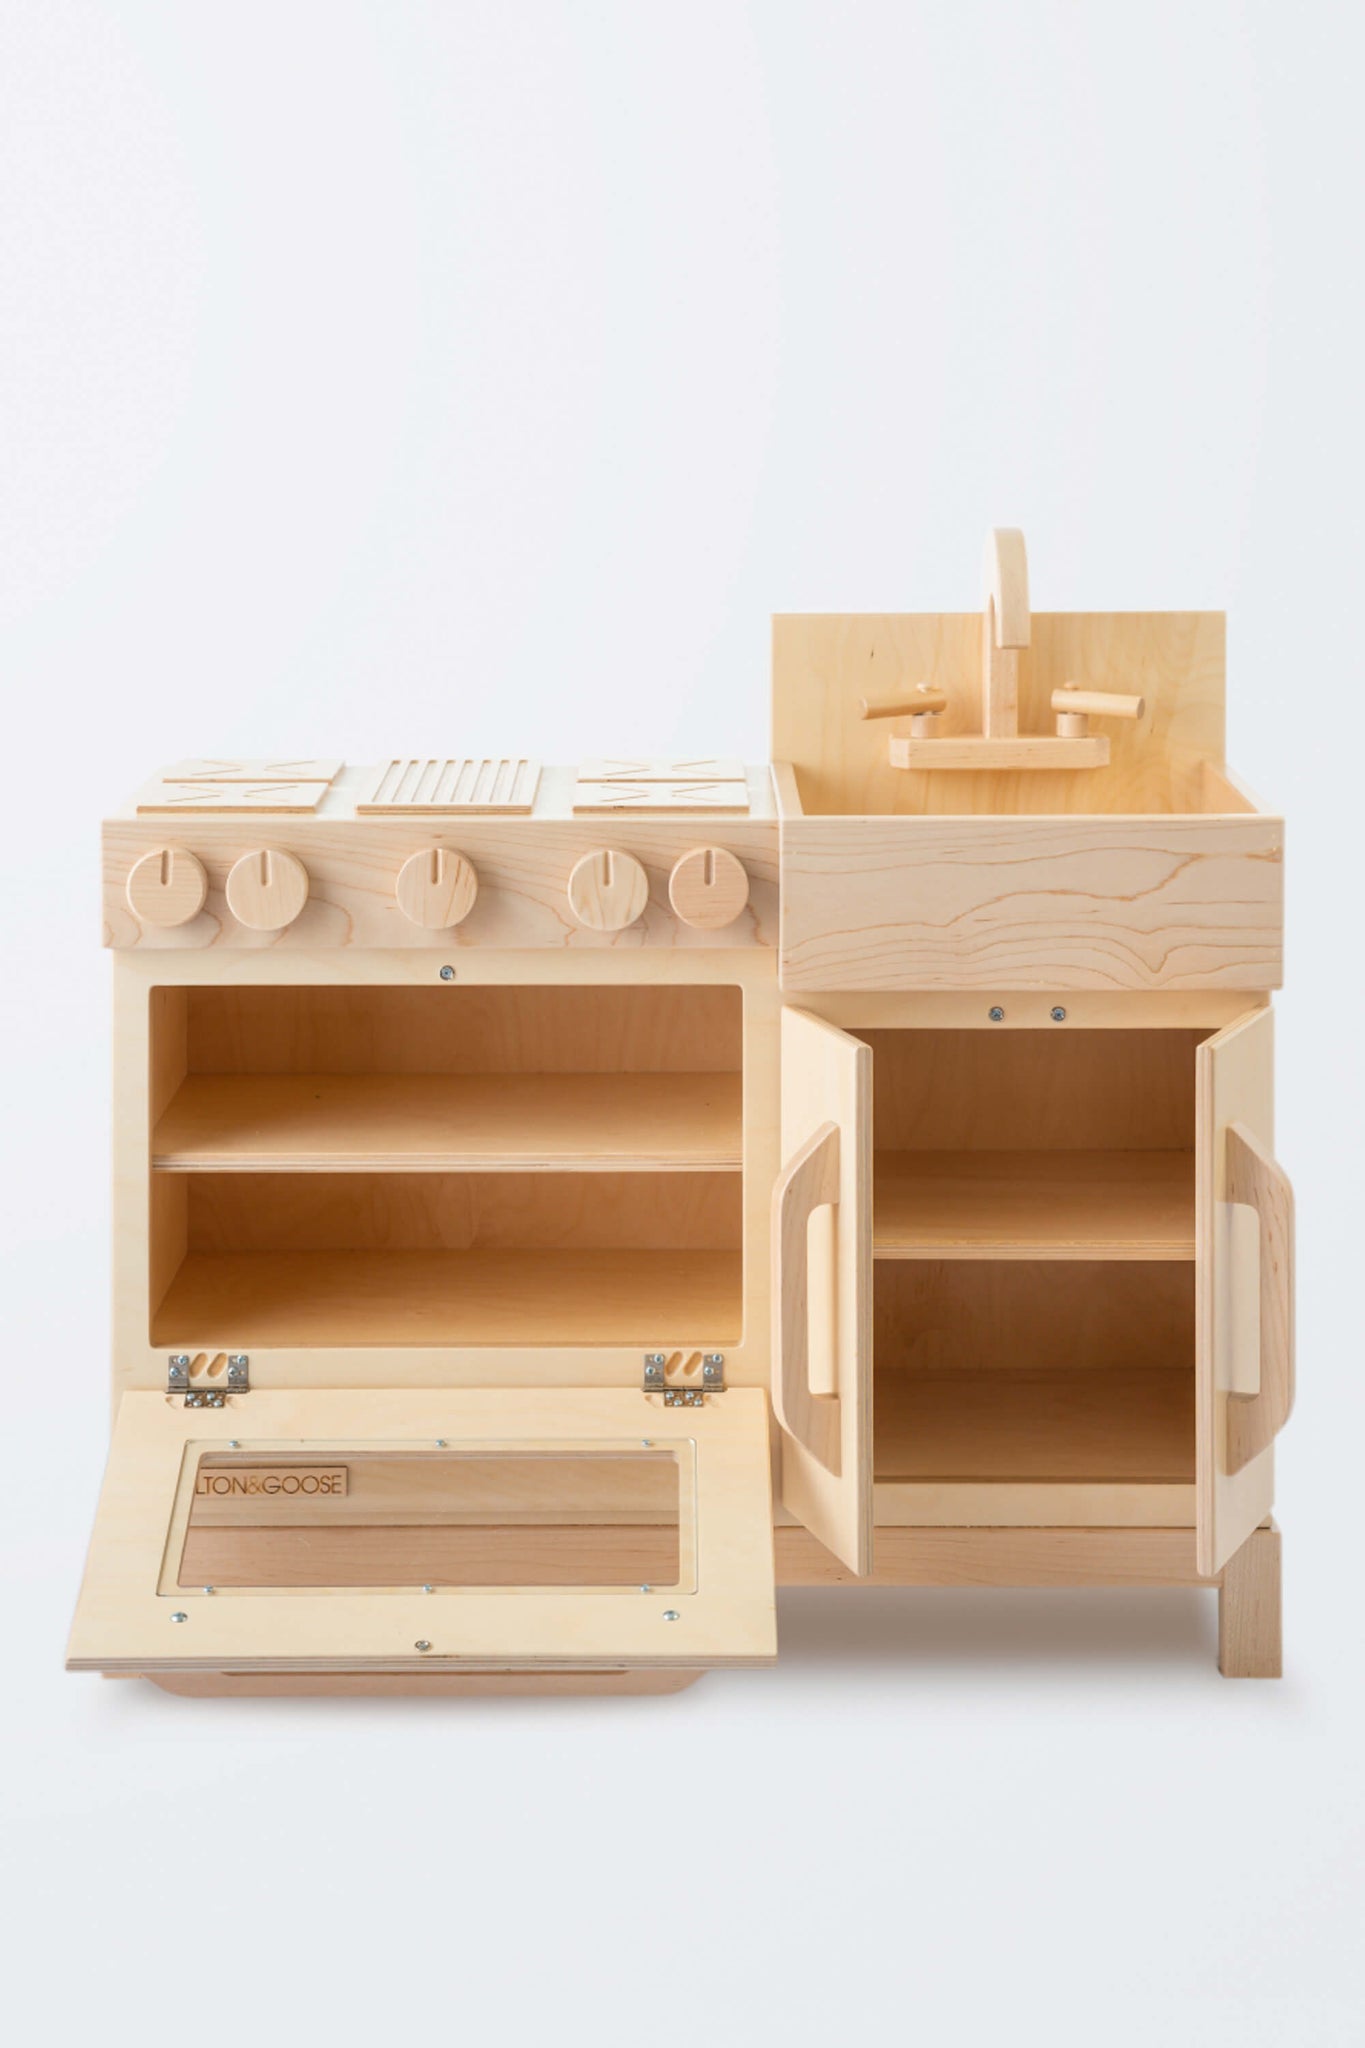 Milton & Goose Essential Play kitchen with a natural finish. The oven door and cabinet doors are open so you can peak inside. This wooden play kitchen is made with Baltic Birch Plywood and North American Maple wood.